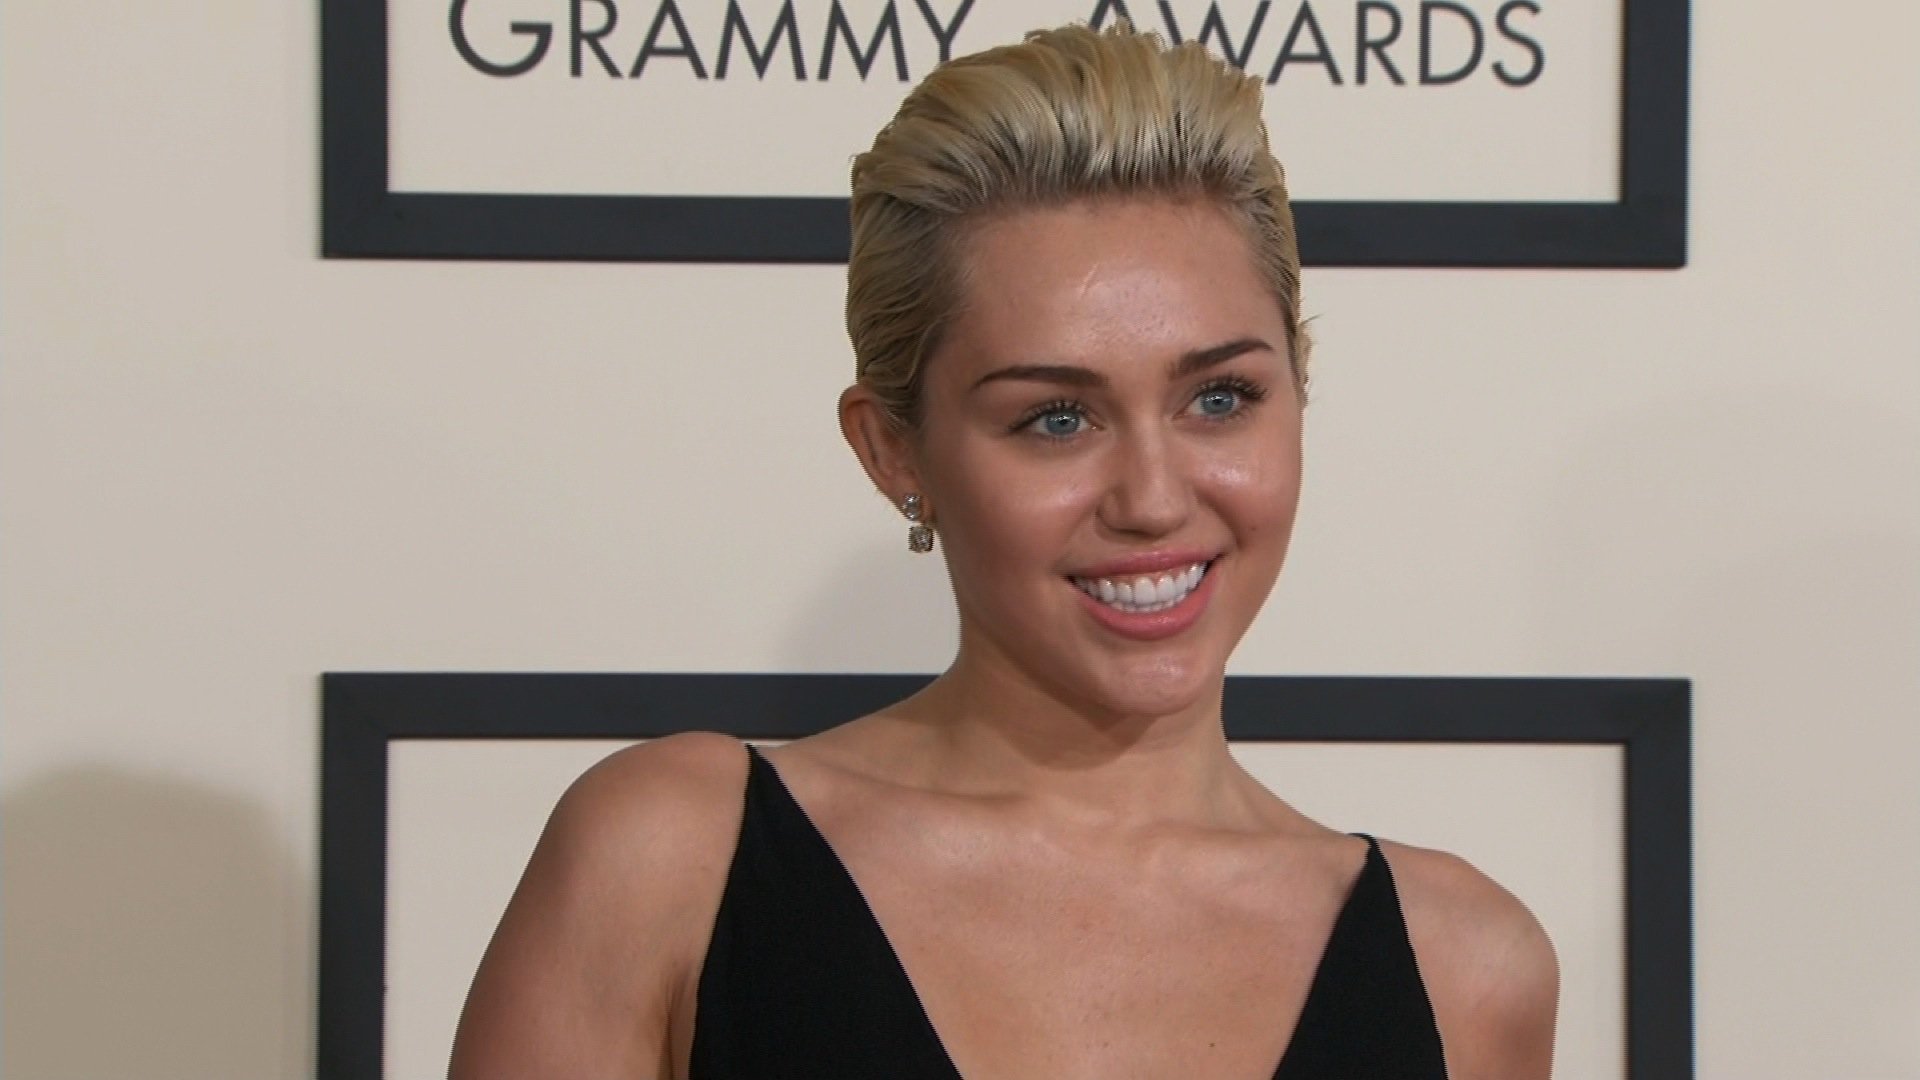 Miley Cyrus on the red carpet at the 57th Annual GRAMMY Awards in Los Angeles on Sunday, February 8, 2015.